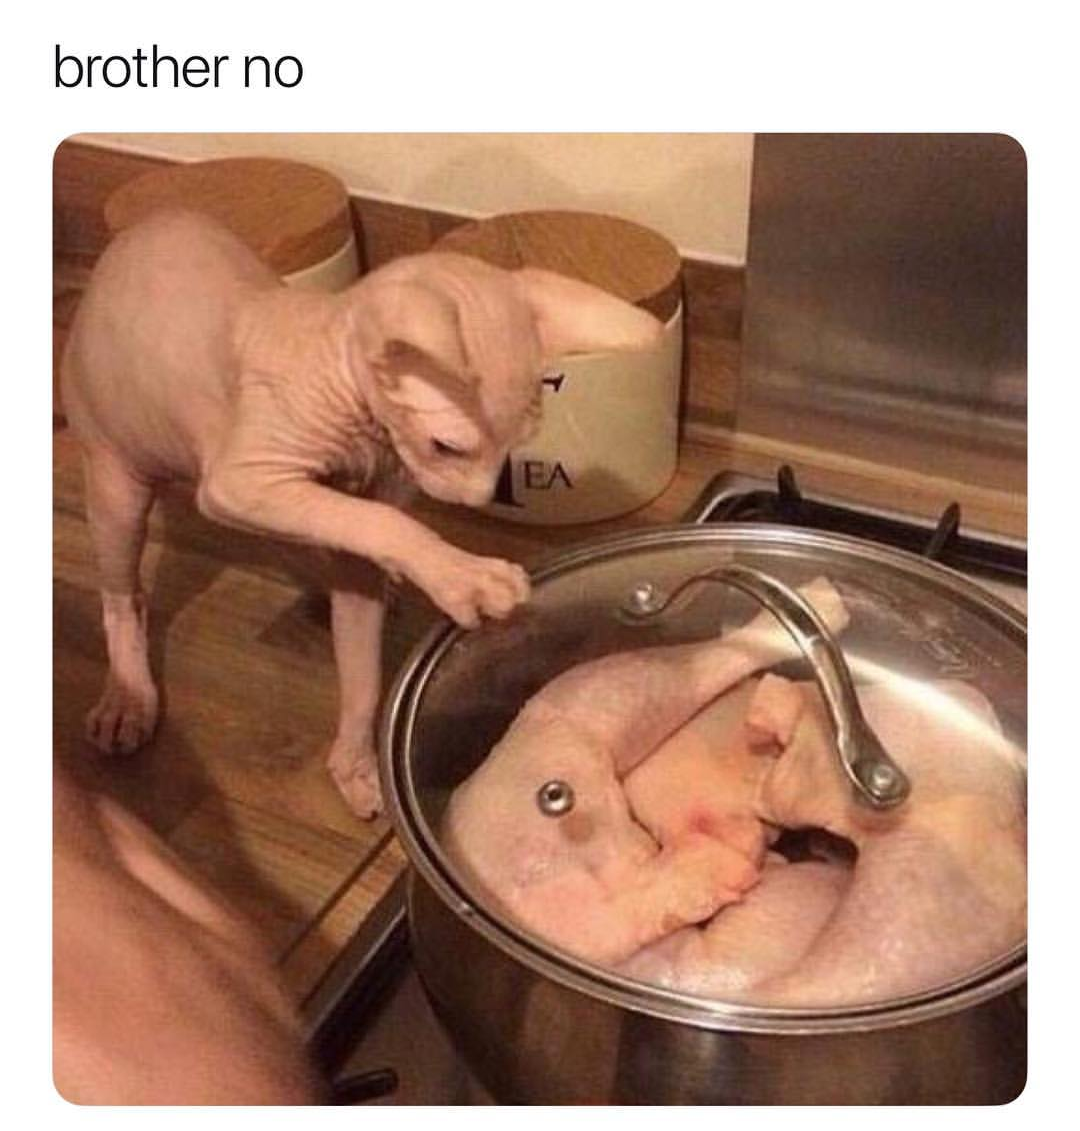 hairless cat very suspicious of the chicken being cooked